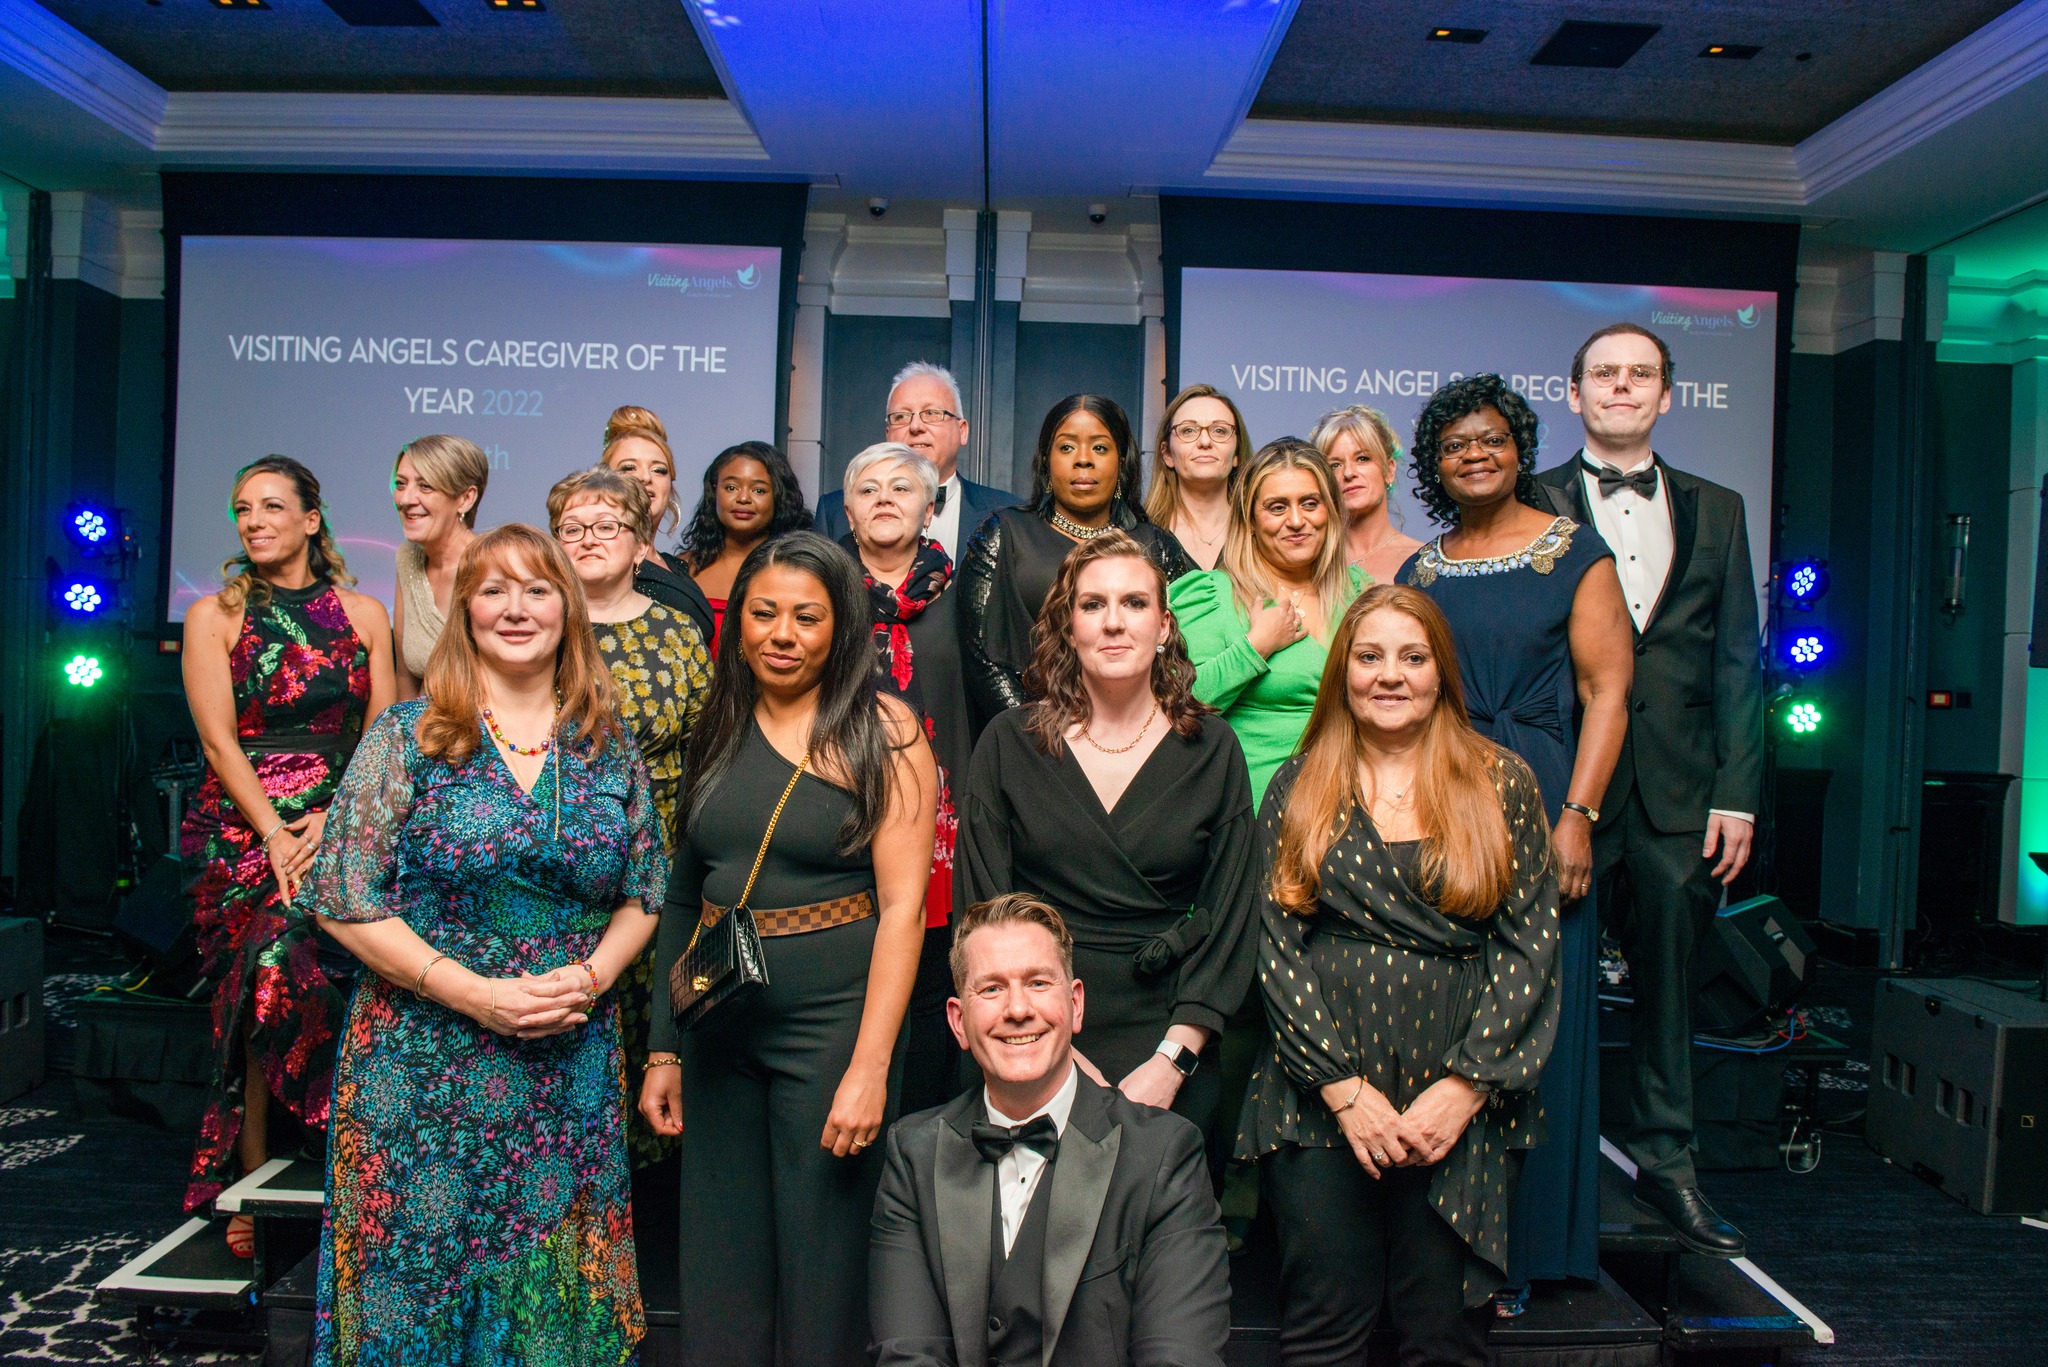 Image: Visiting Angels are proud to be finalists at the UK Company Culture Awards